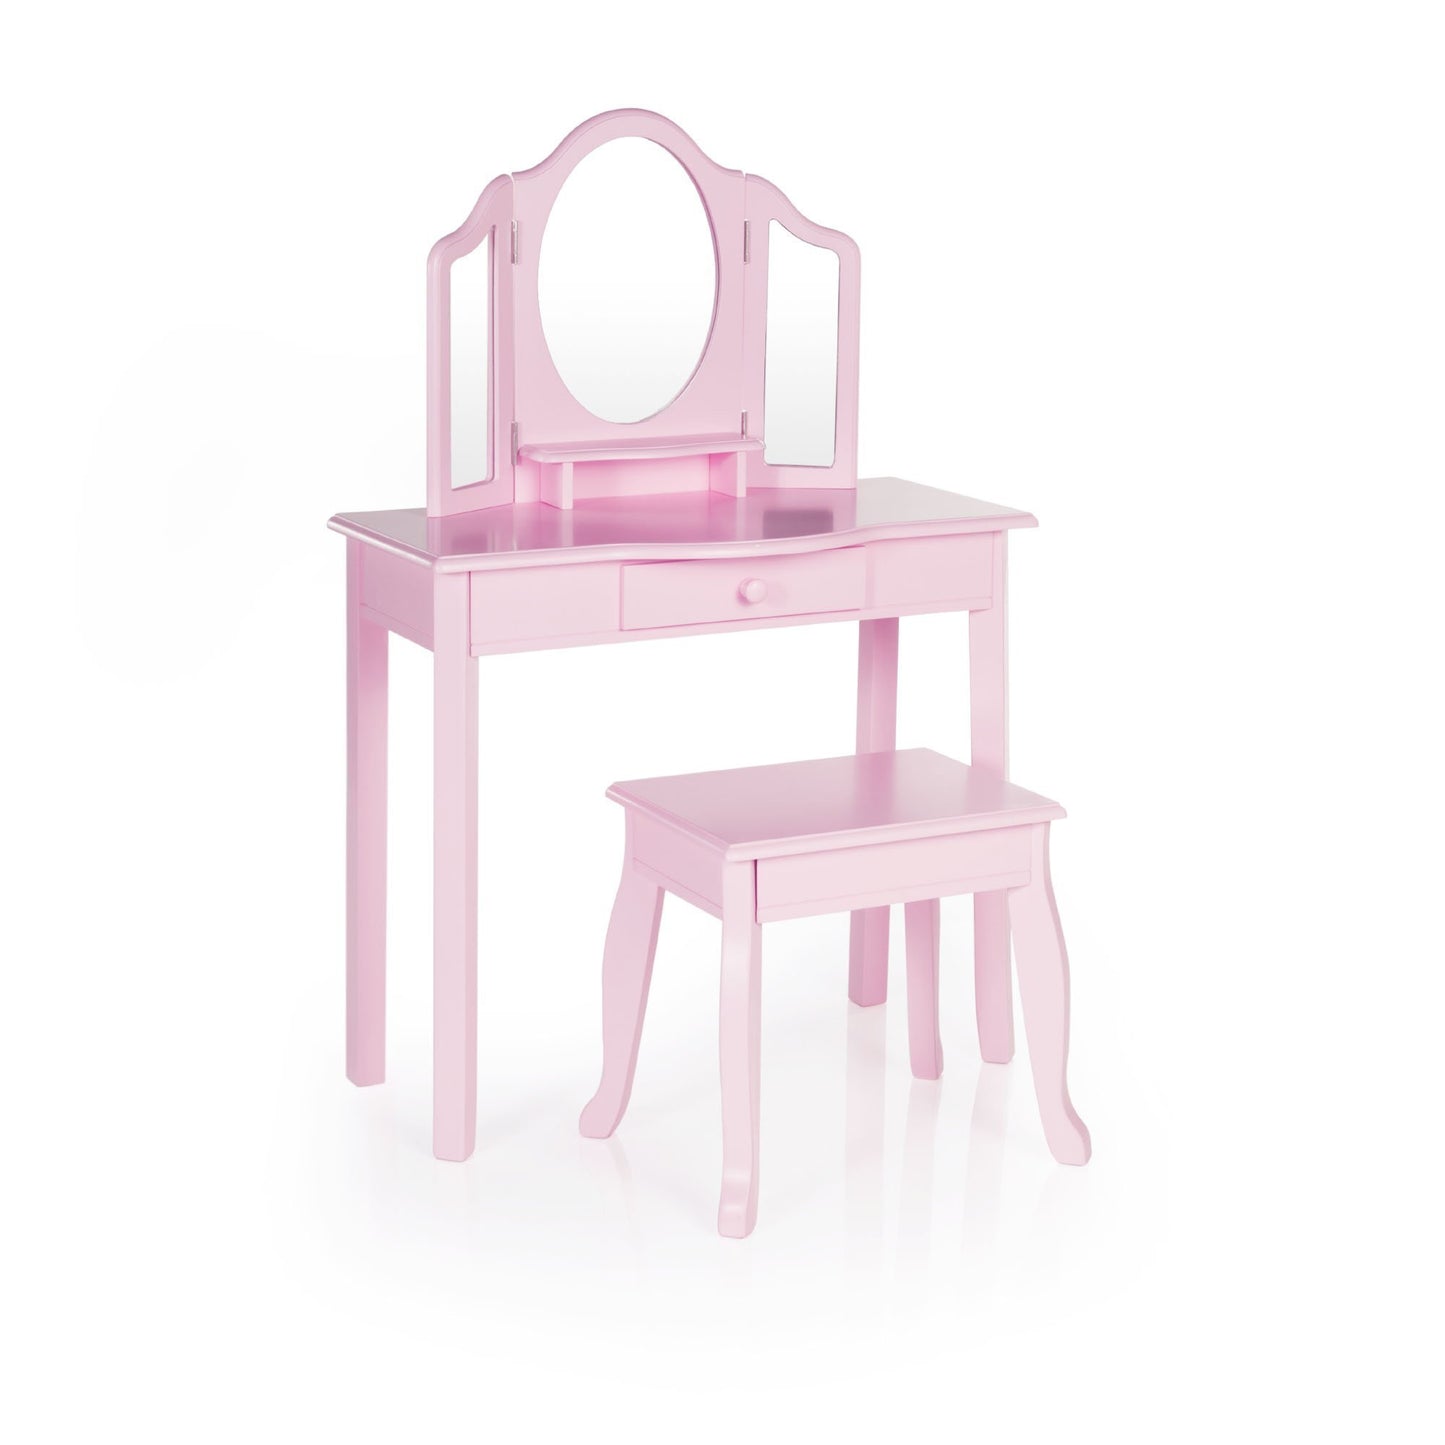 Shop here guidecraft vanity and stool pink kids wooden table and chair set with 3 mirrors and make up drawer storage for toddlers childrens furniture